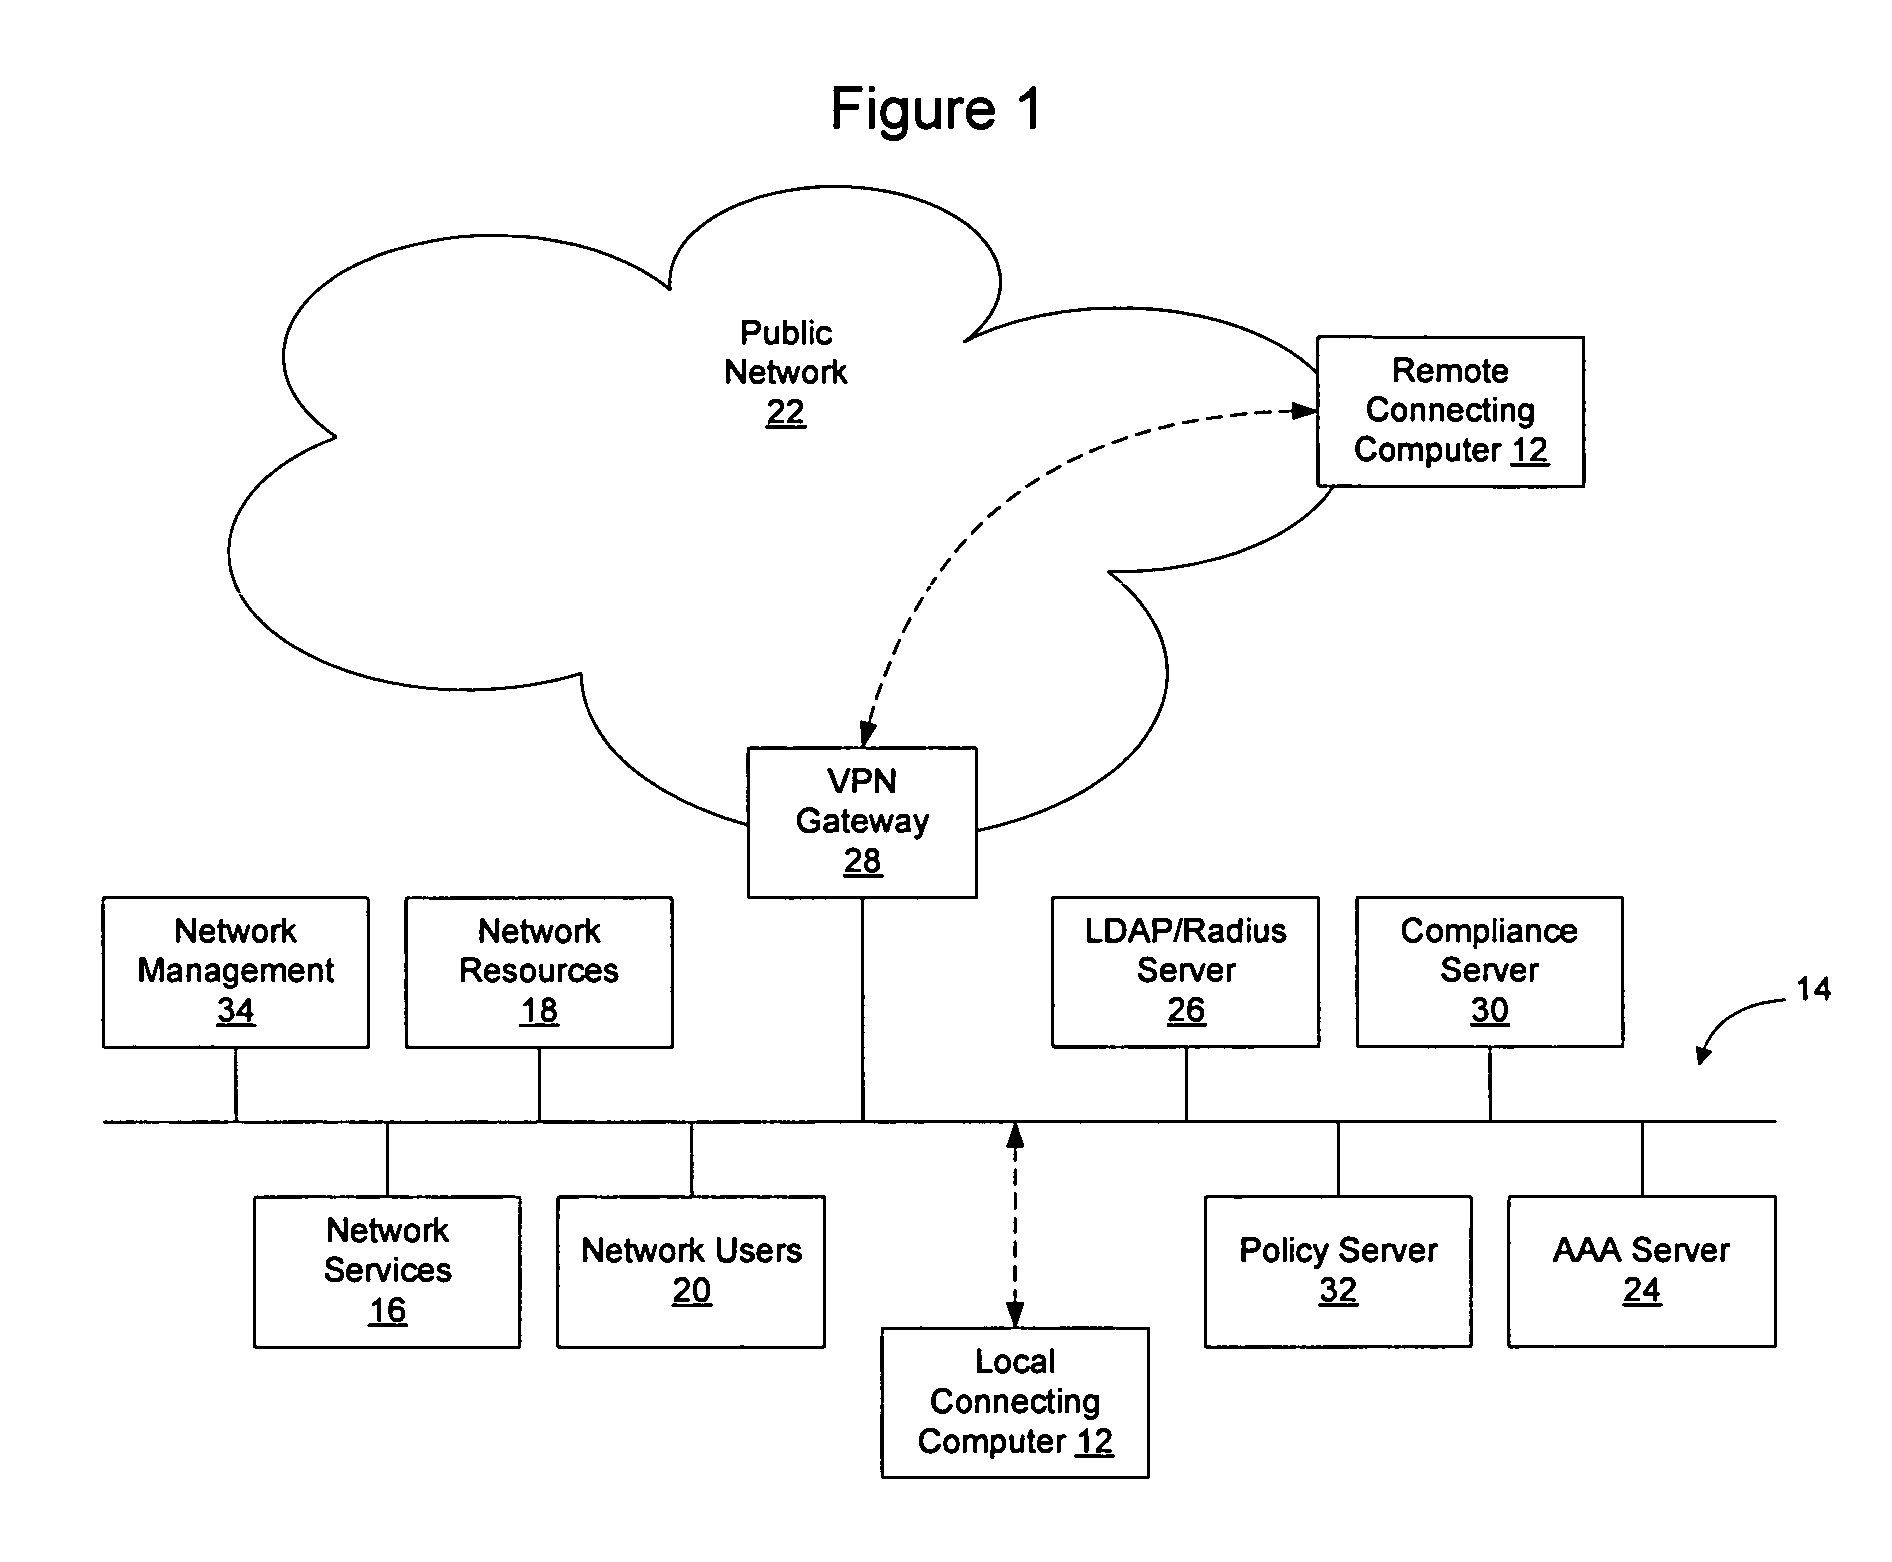 Method and apparatus for rating a compliance level of a computer connecting to a network